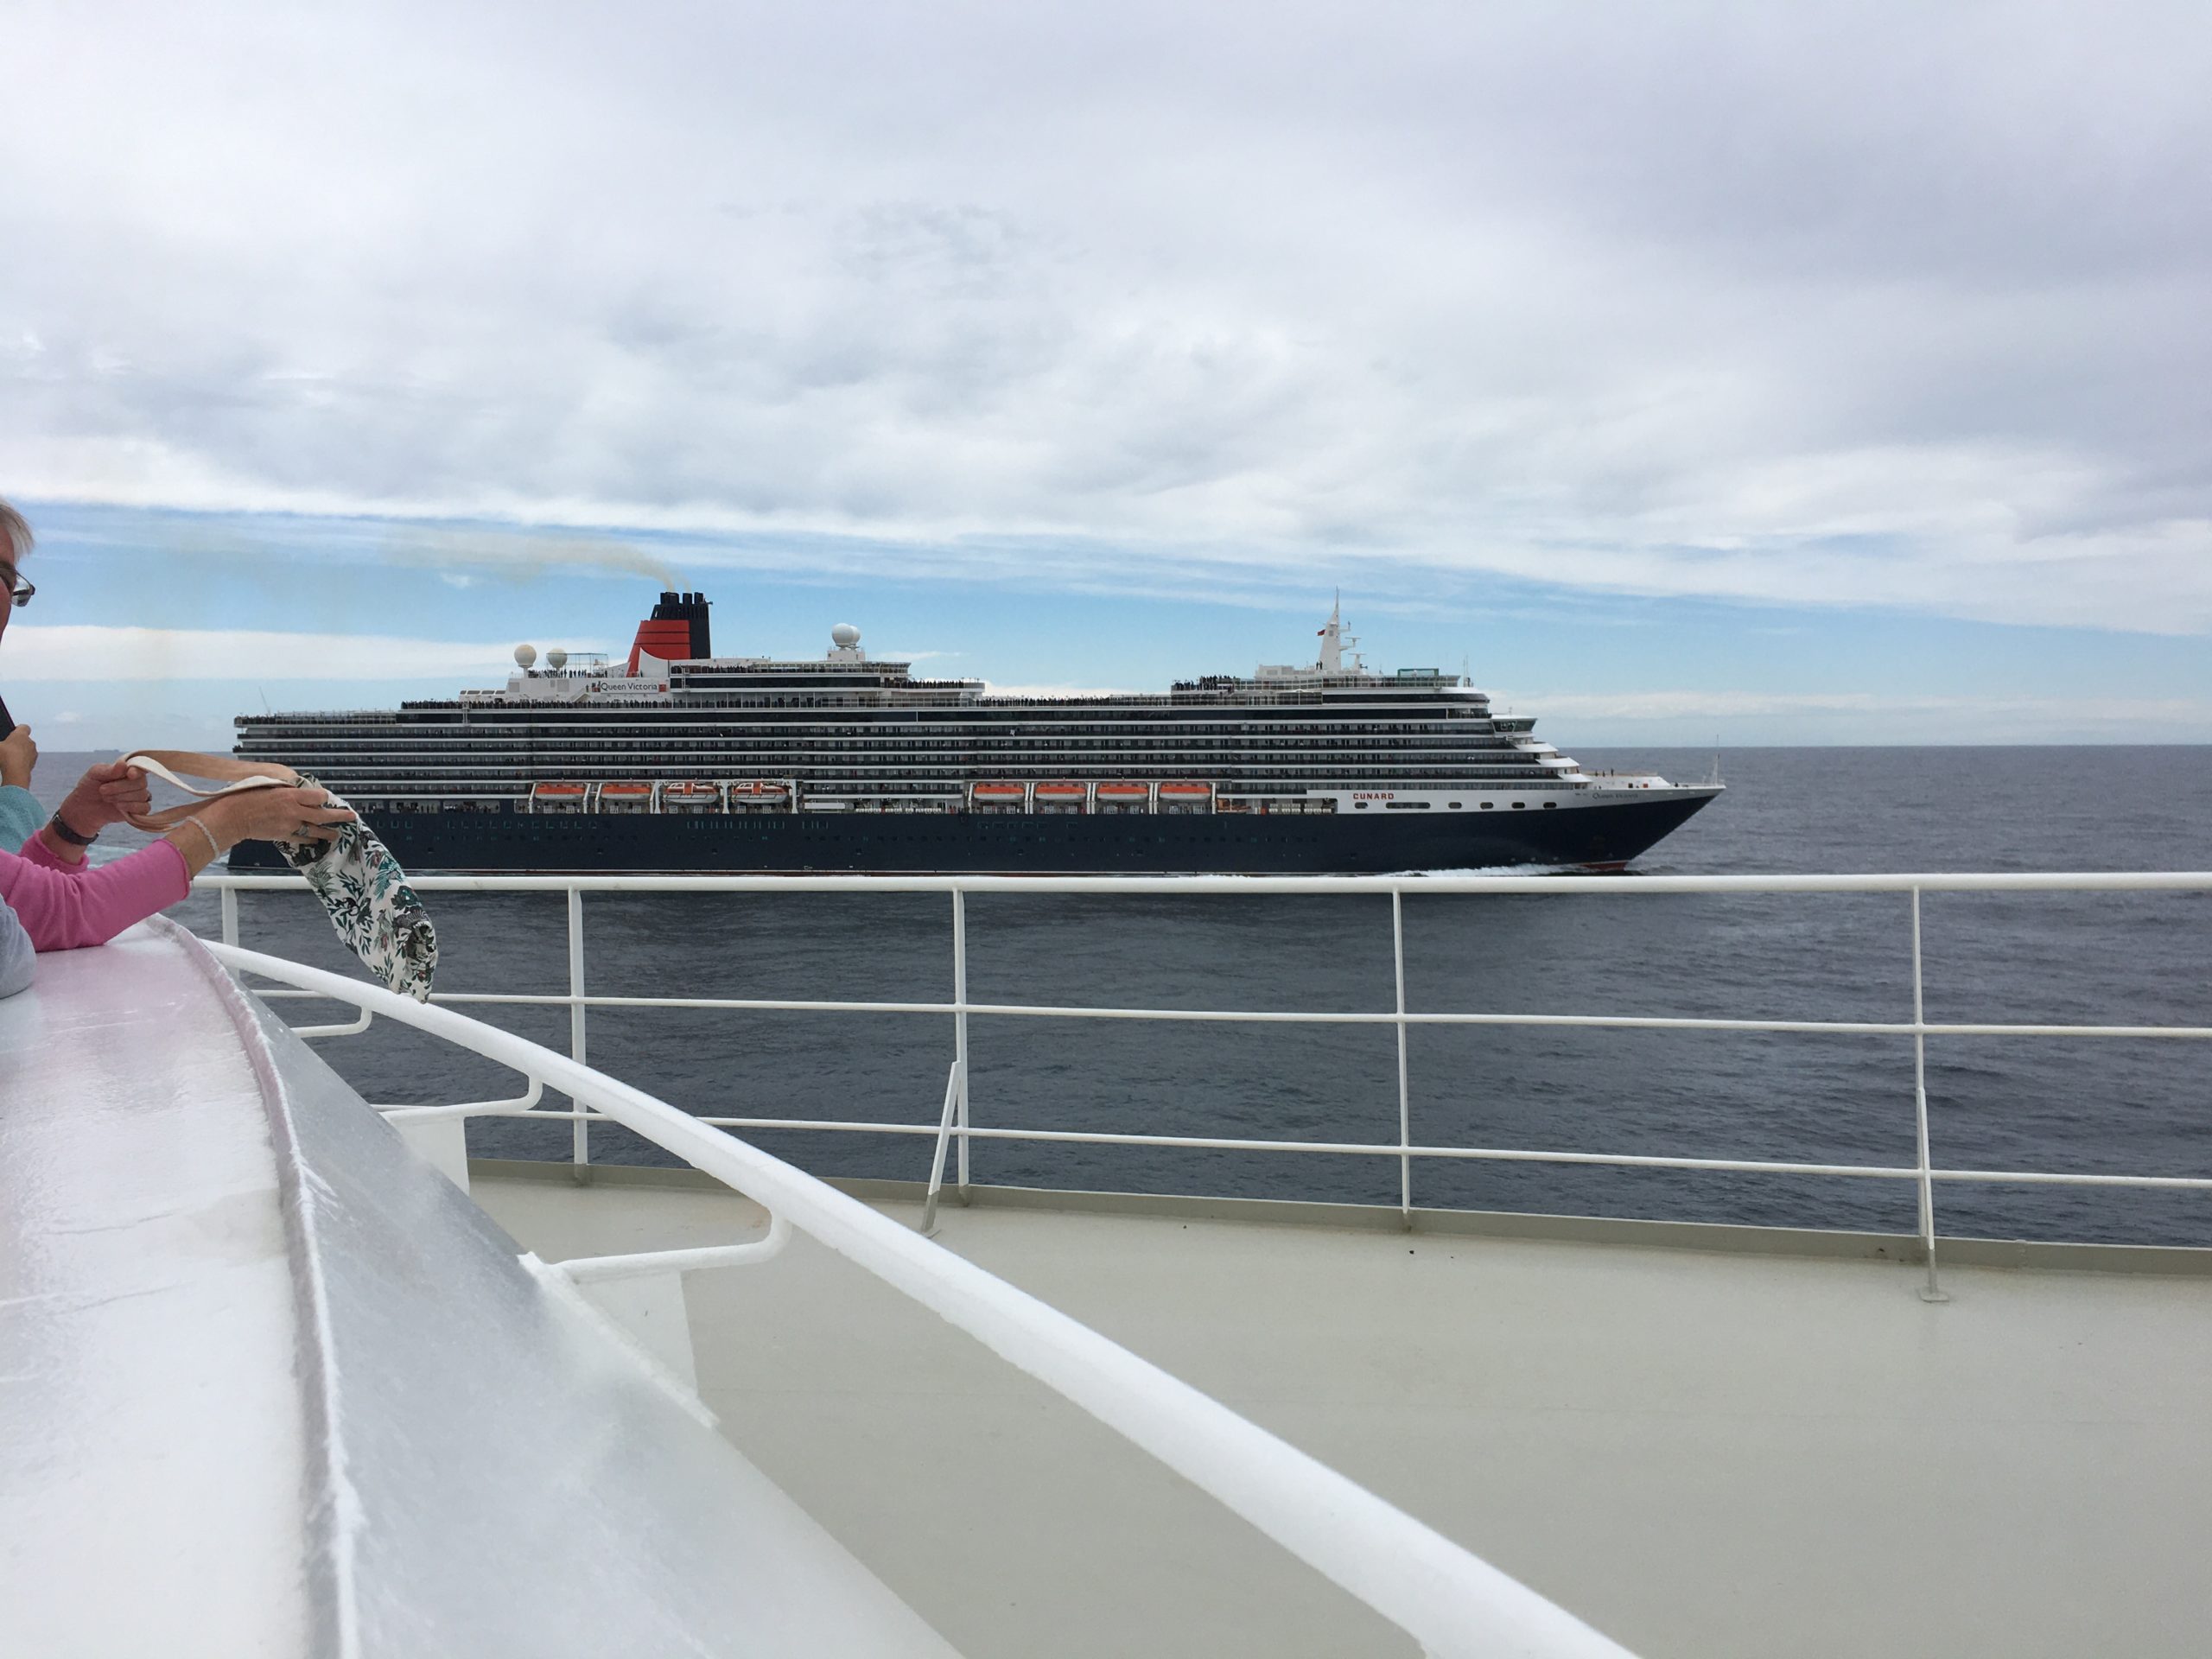 Queen Victoria lets out loud whistles, toots and cheers. QM2 replies. Loudly.